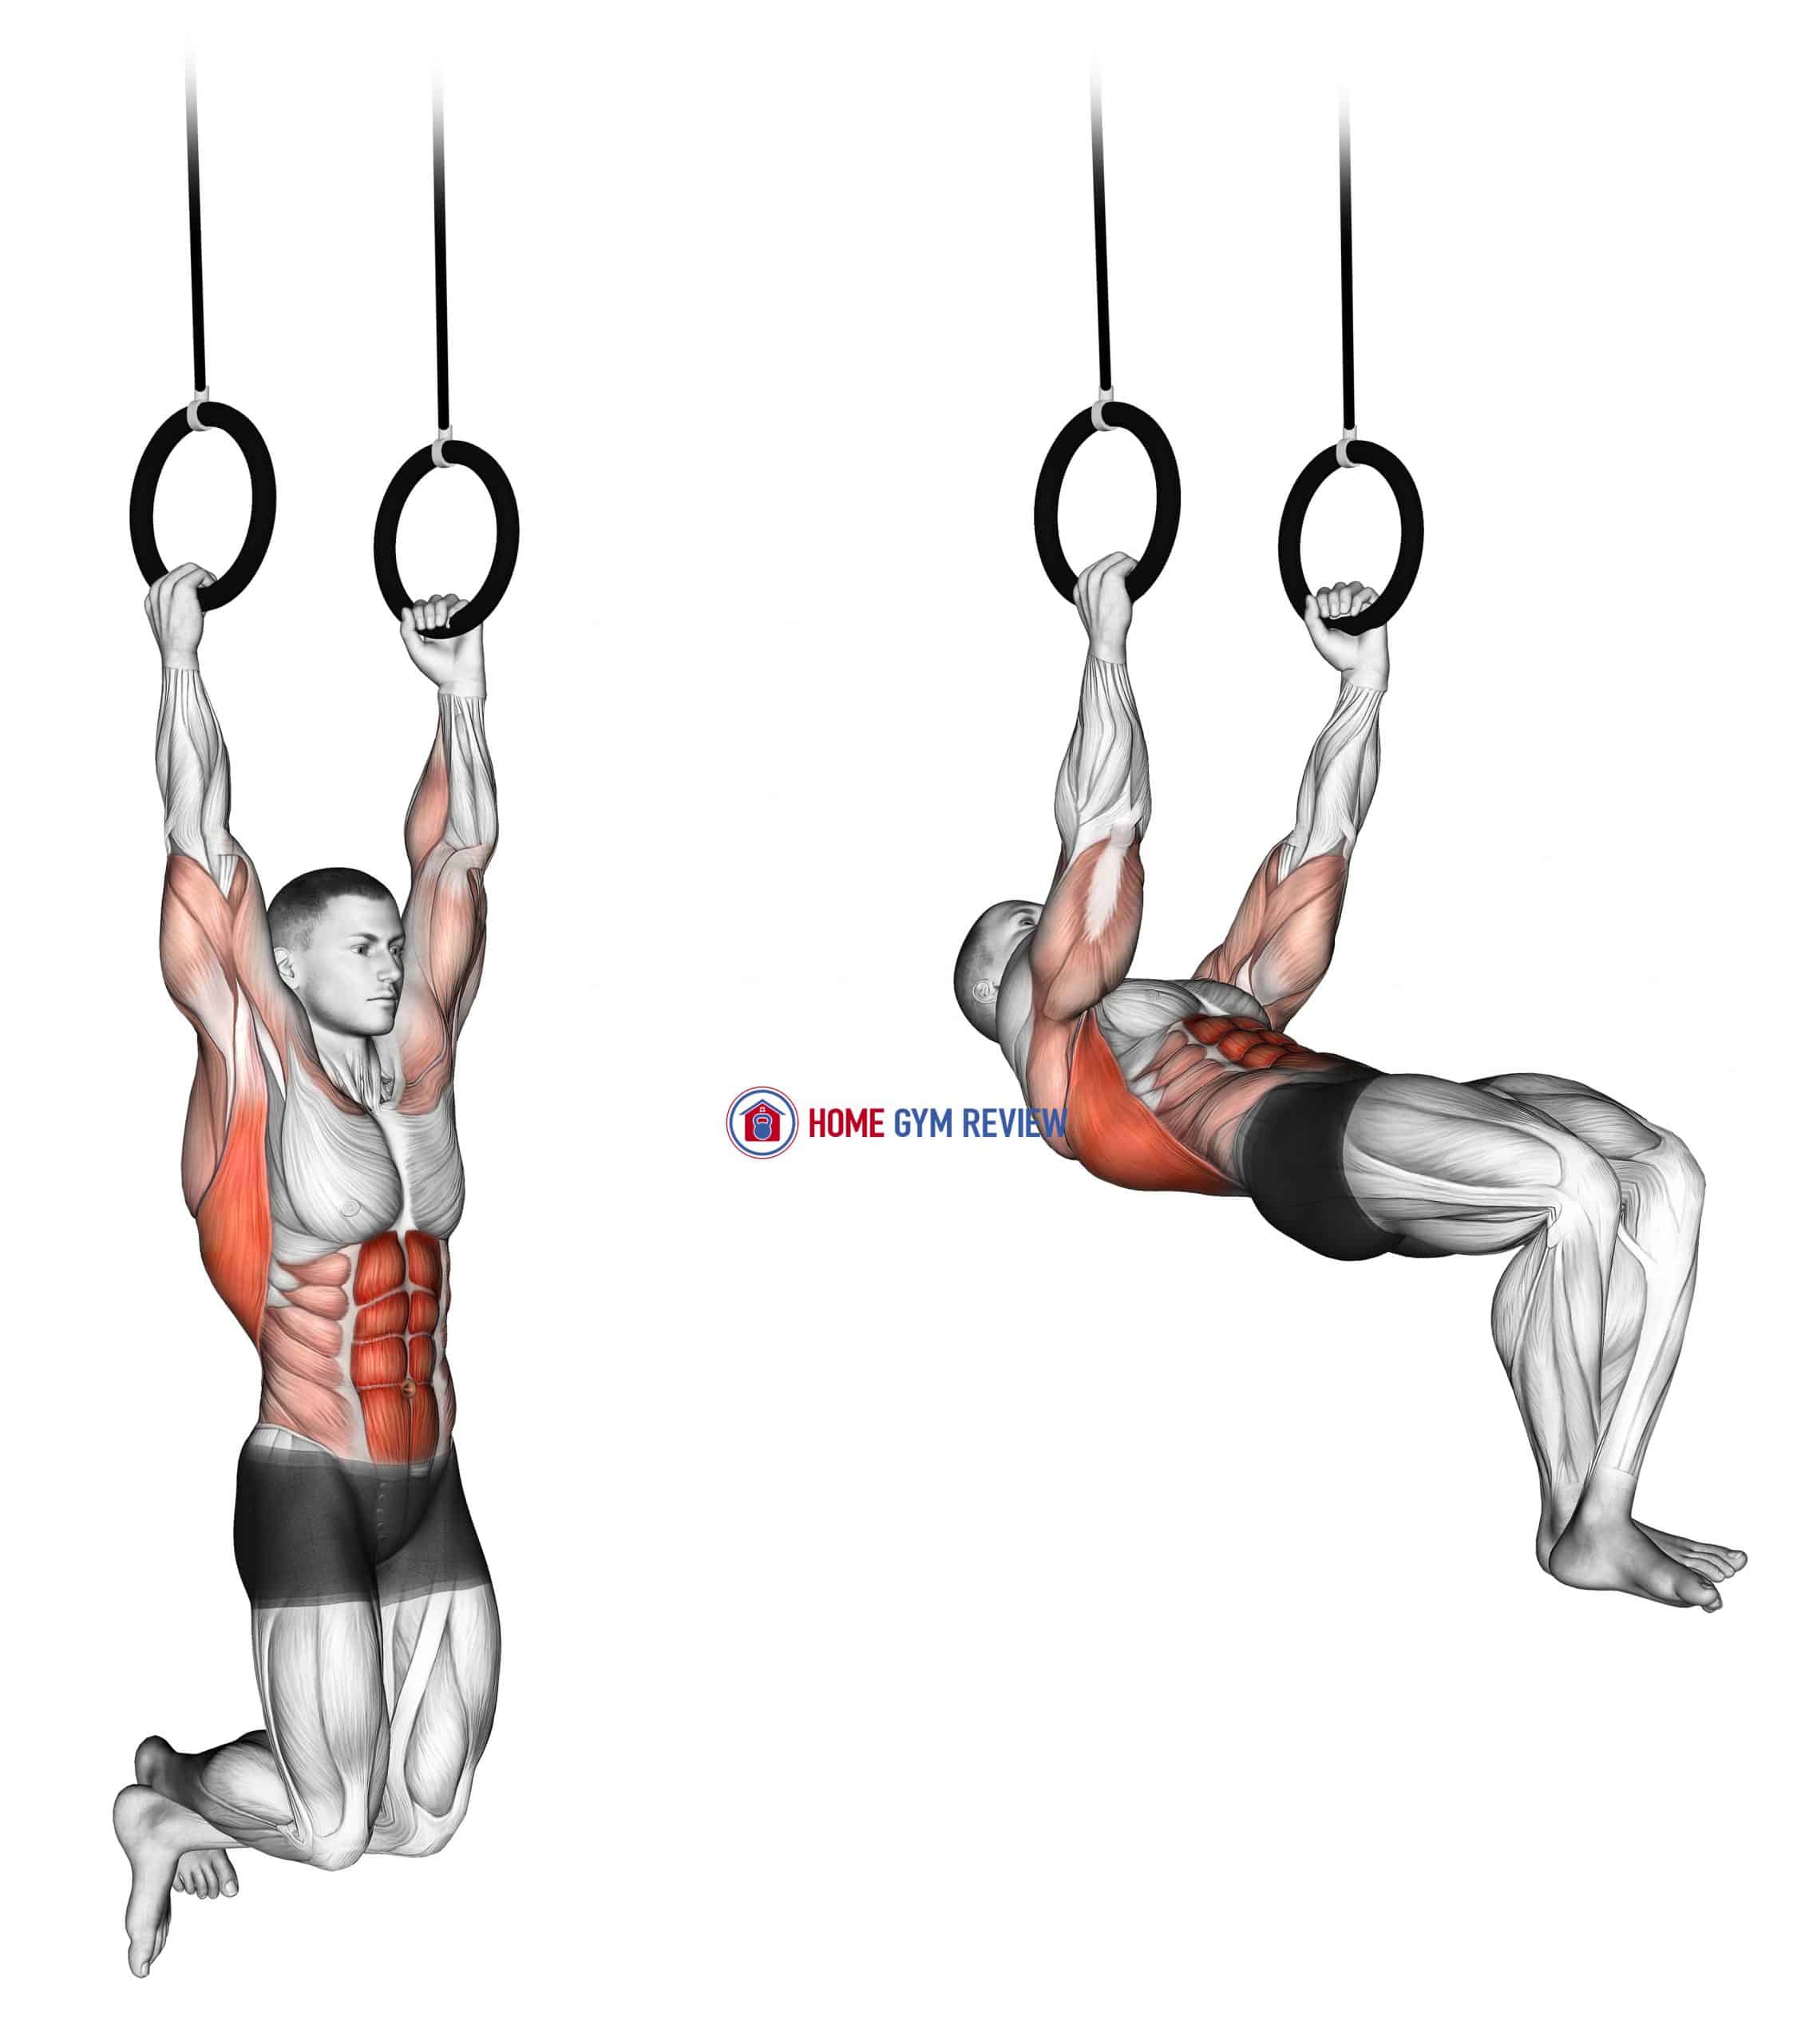 Kipping Muscle Up